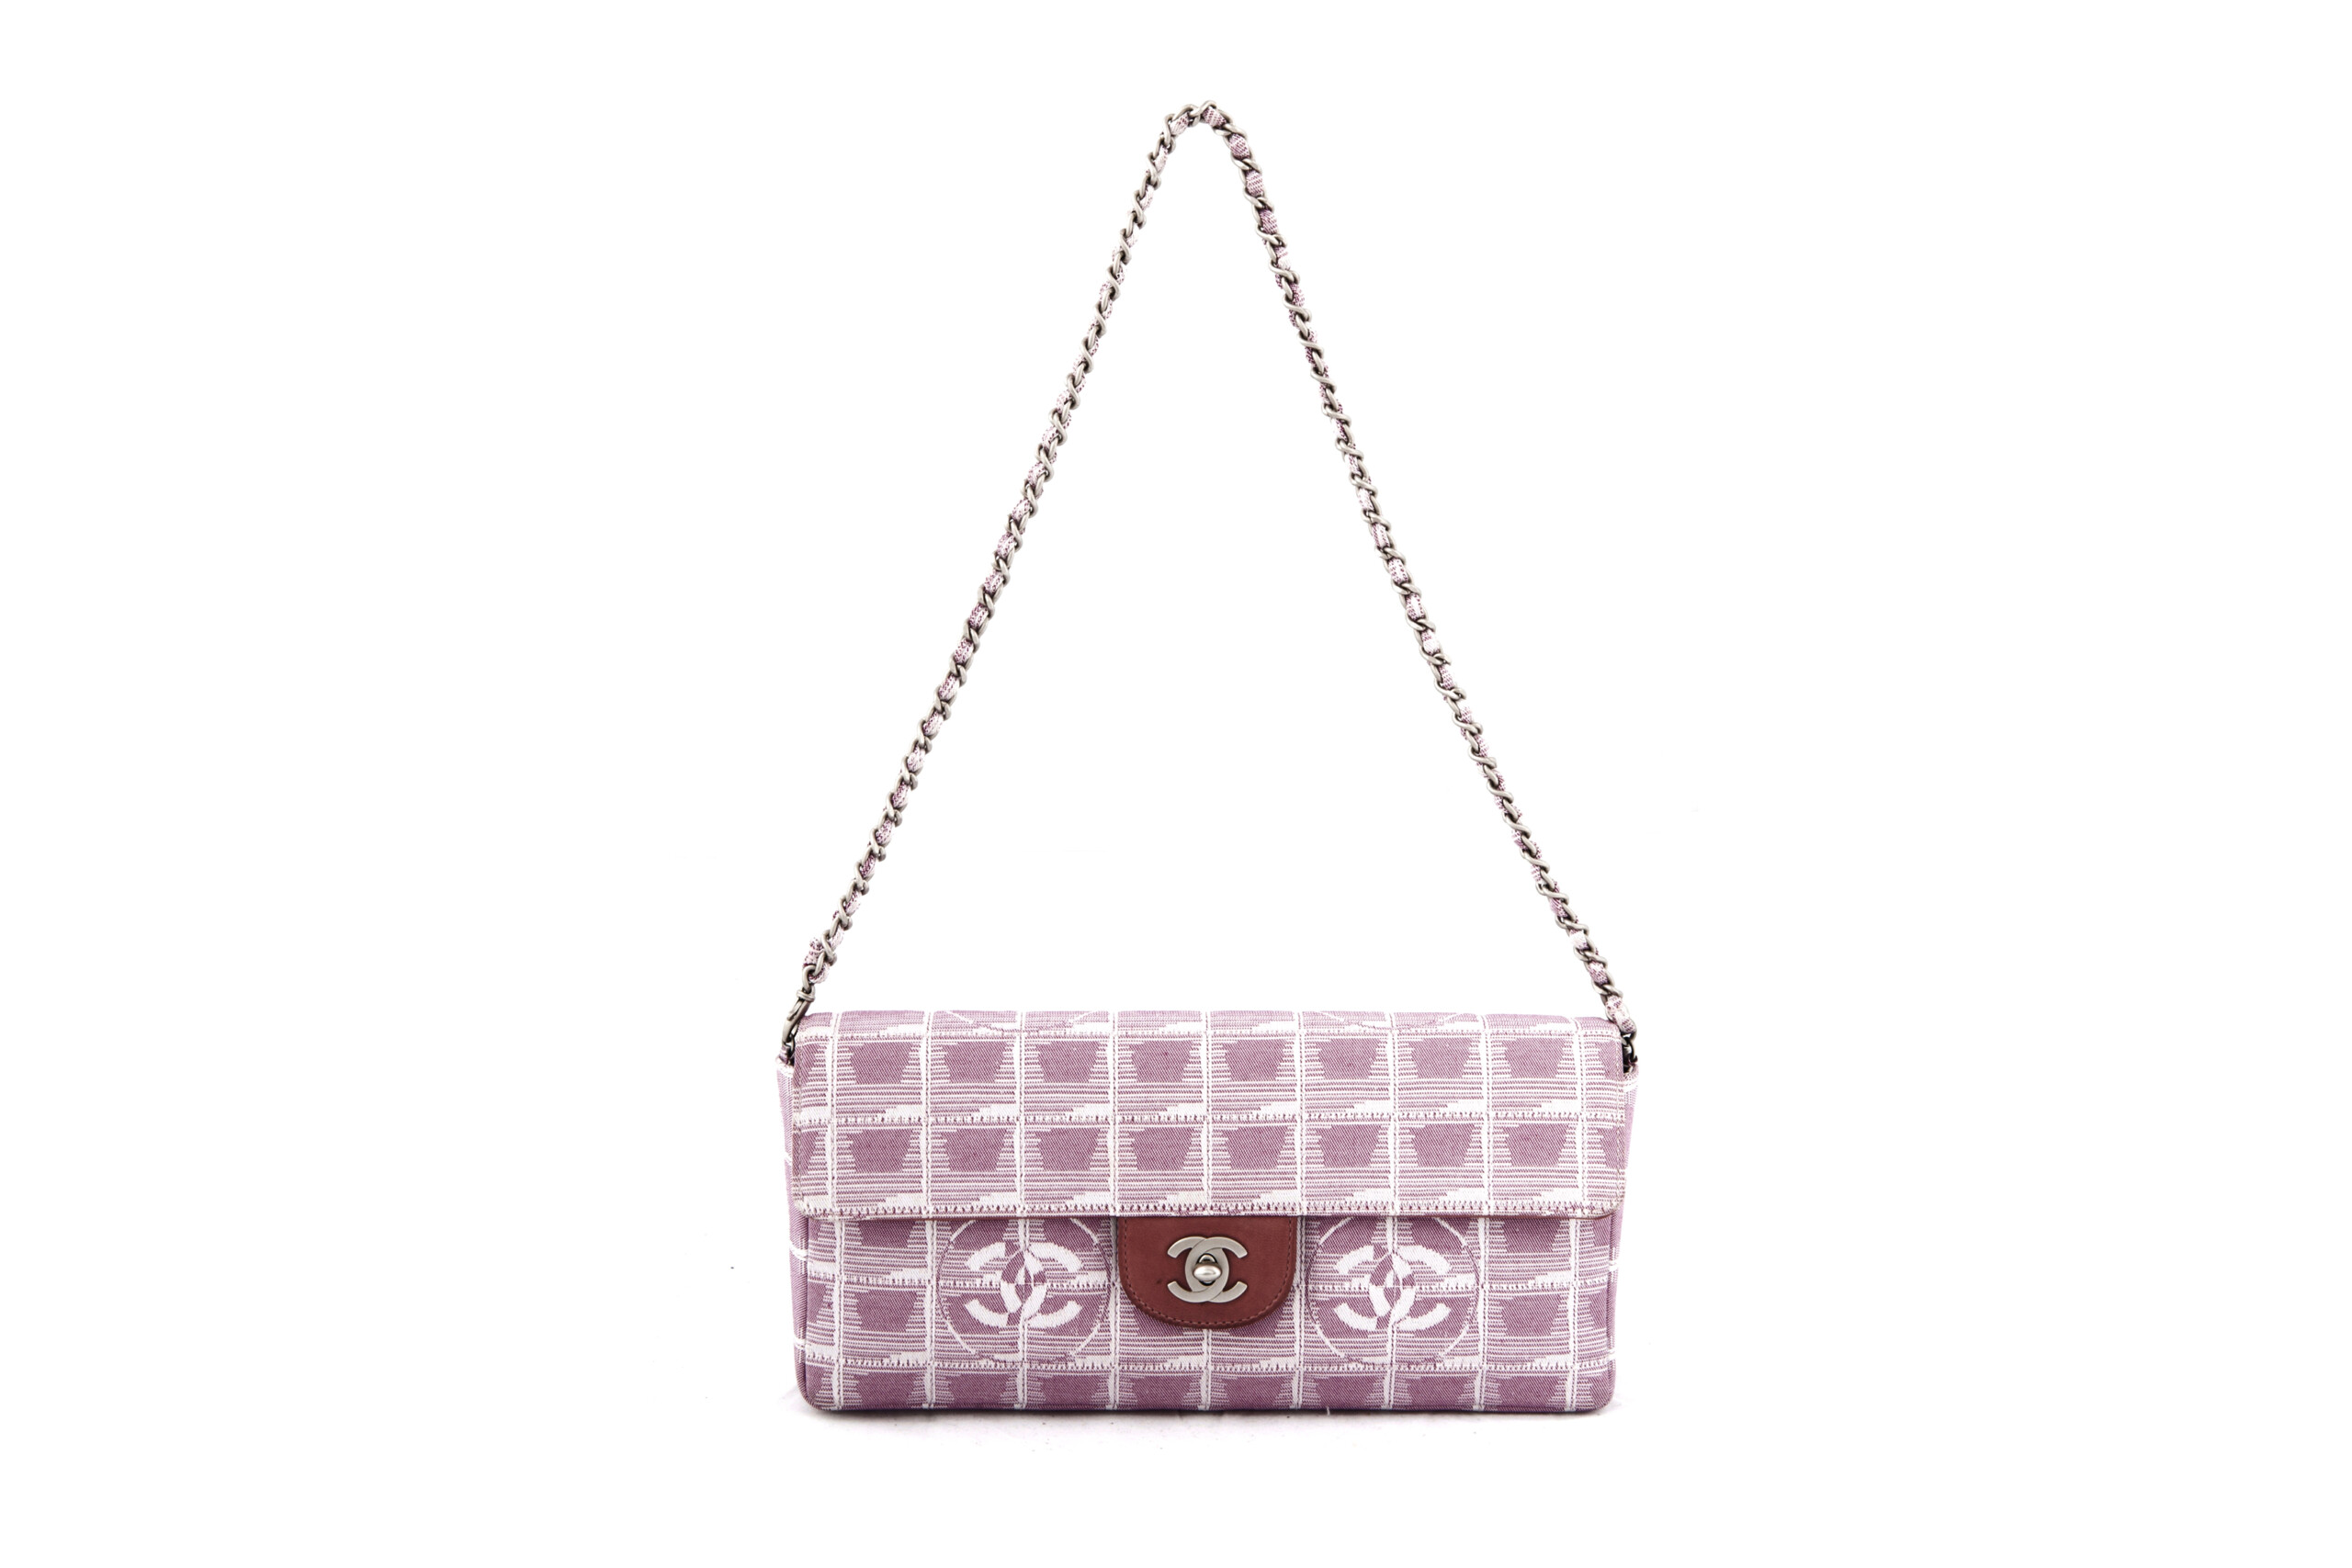 Chanel Timeless pink and white baguette